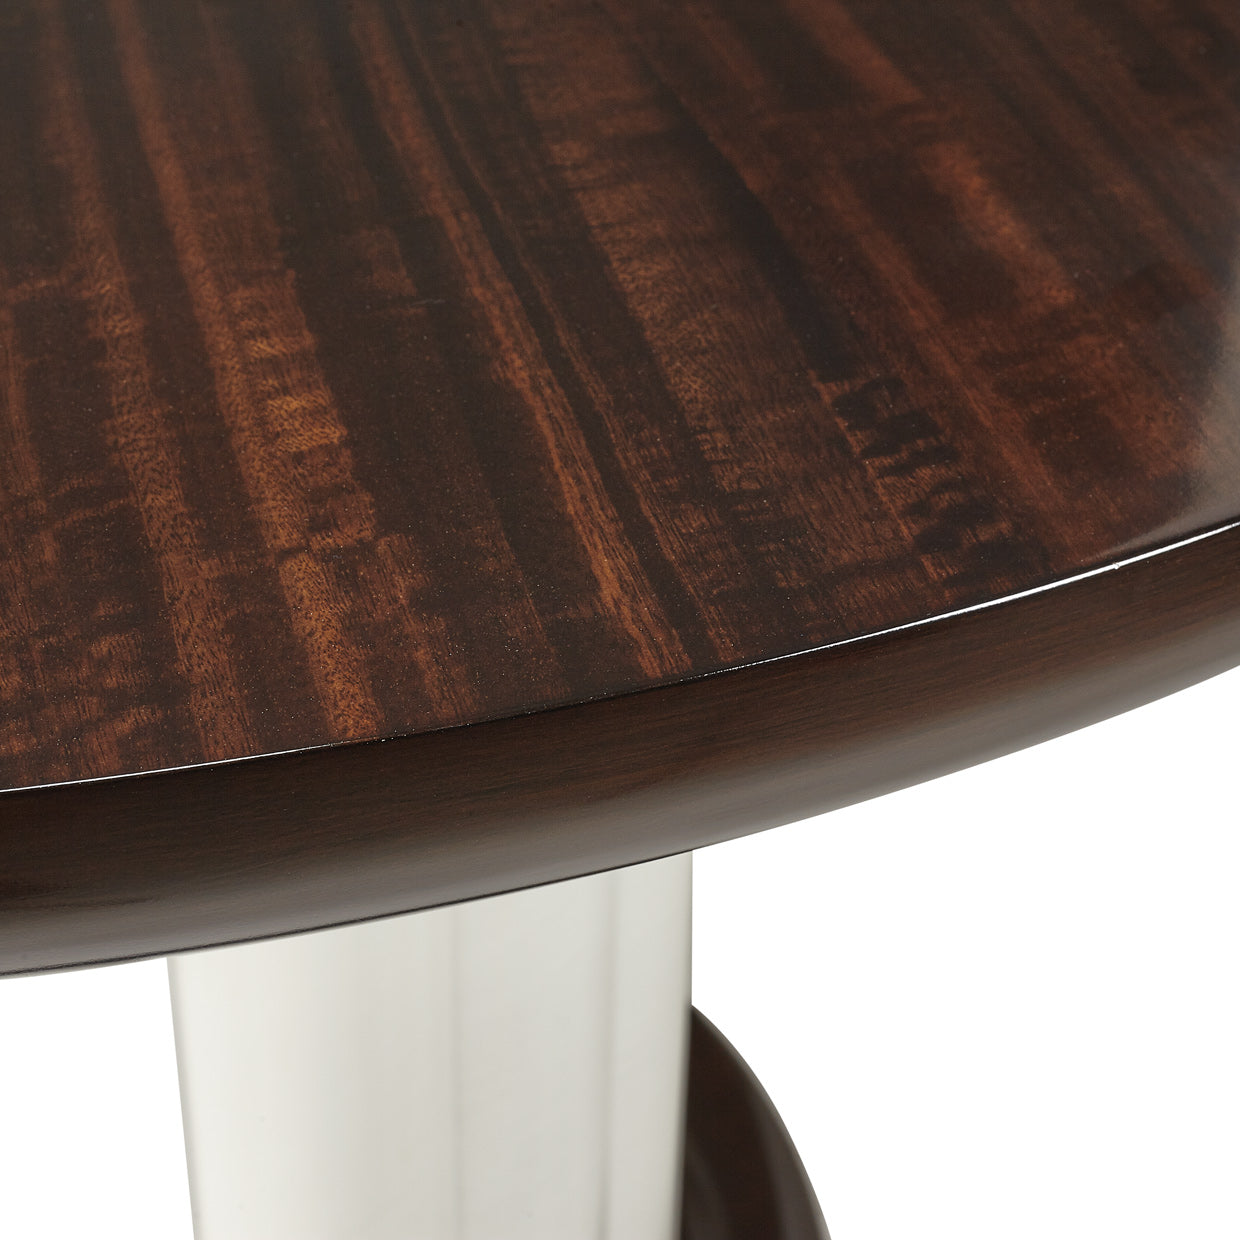 Paris Chic, Round Dining Table, 48-inch, Dining Table Set, Timeless elegance, Sophisticated design, Modern dining room, Espresso-finished hardwood, Figured, eucalyptus veneer, Luxury and style, Ample space, Intimate gatherings, Family meals, Dining ensemble, Home décor, dream art , Michael amini